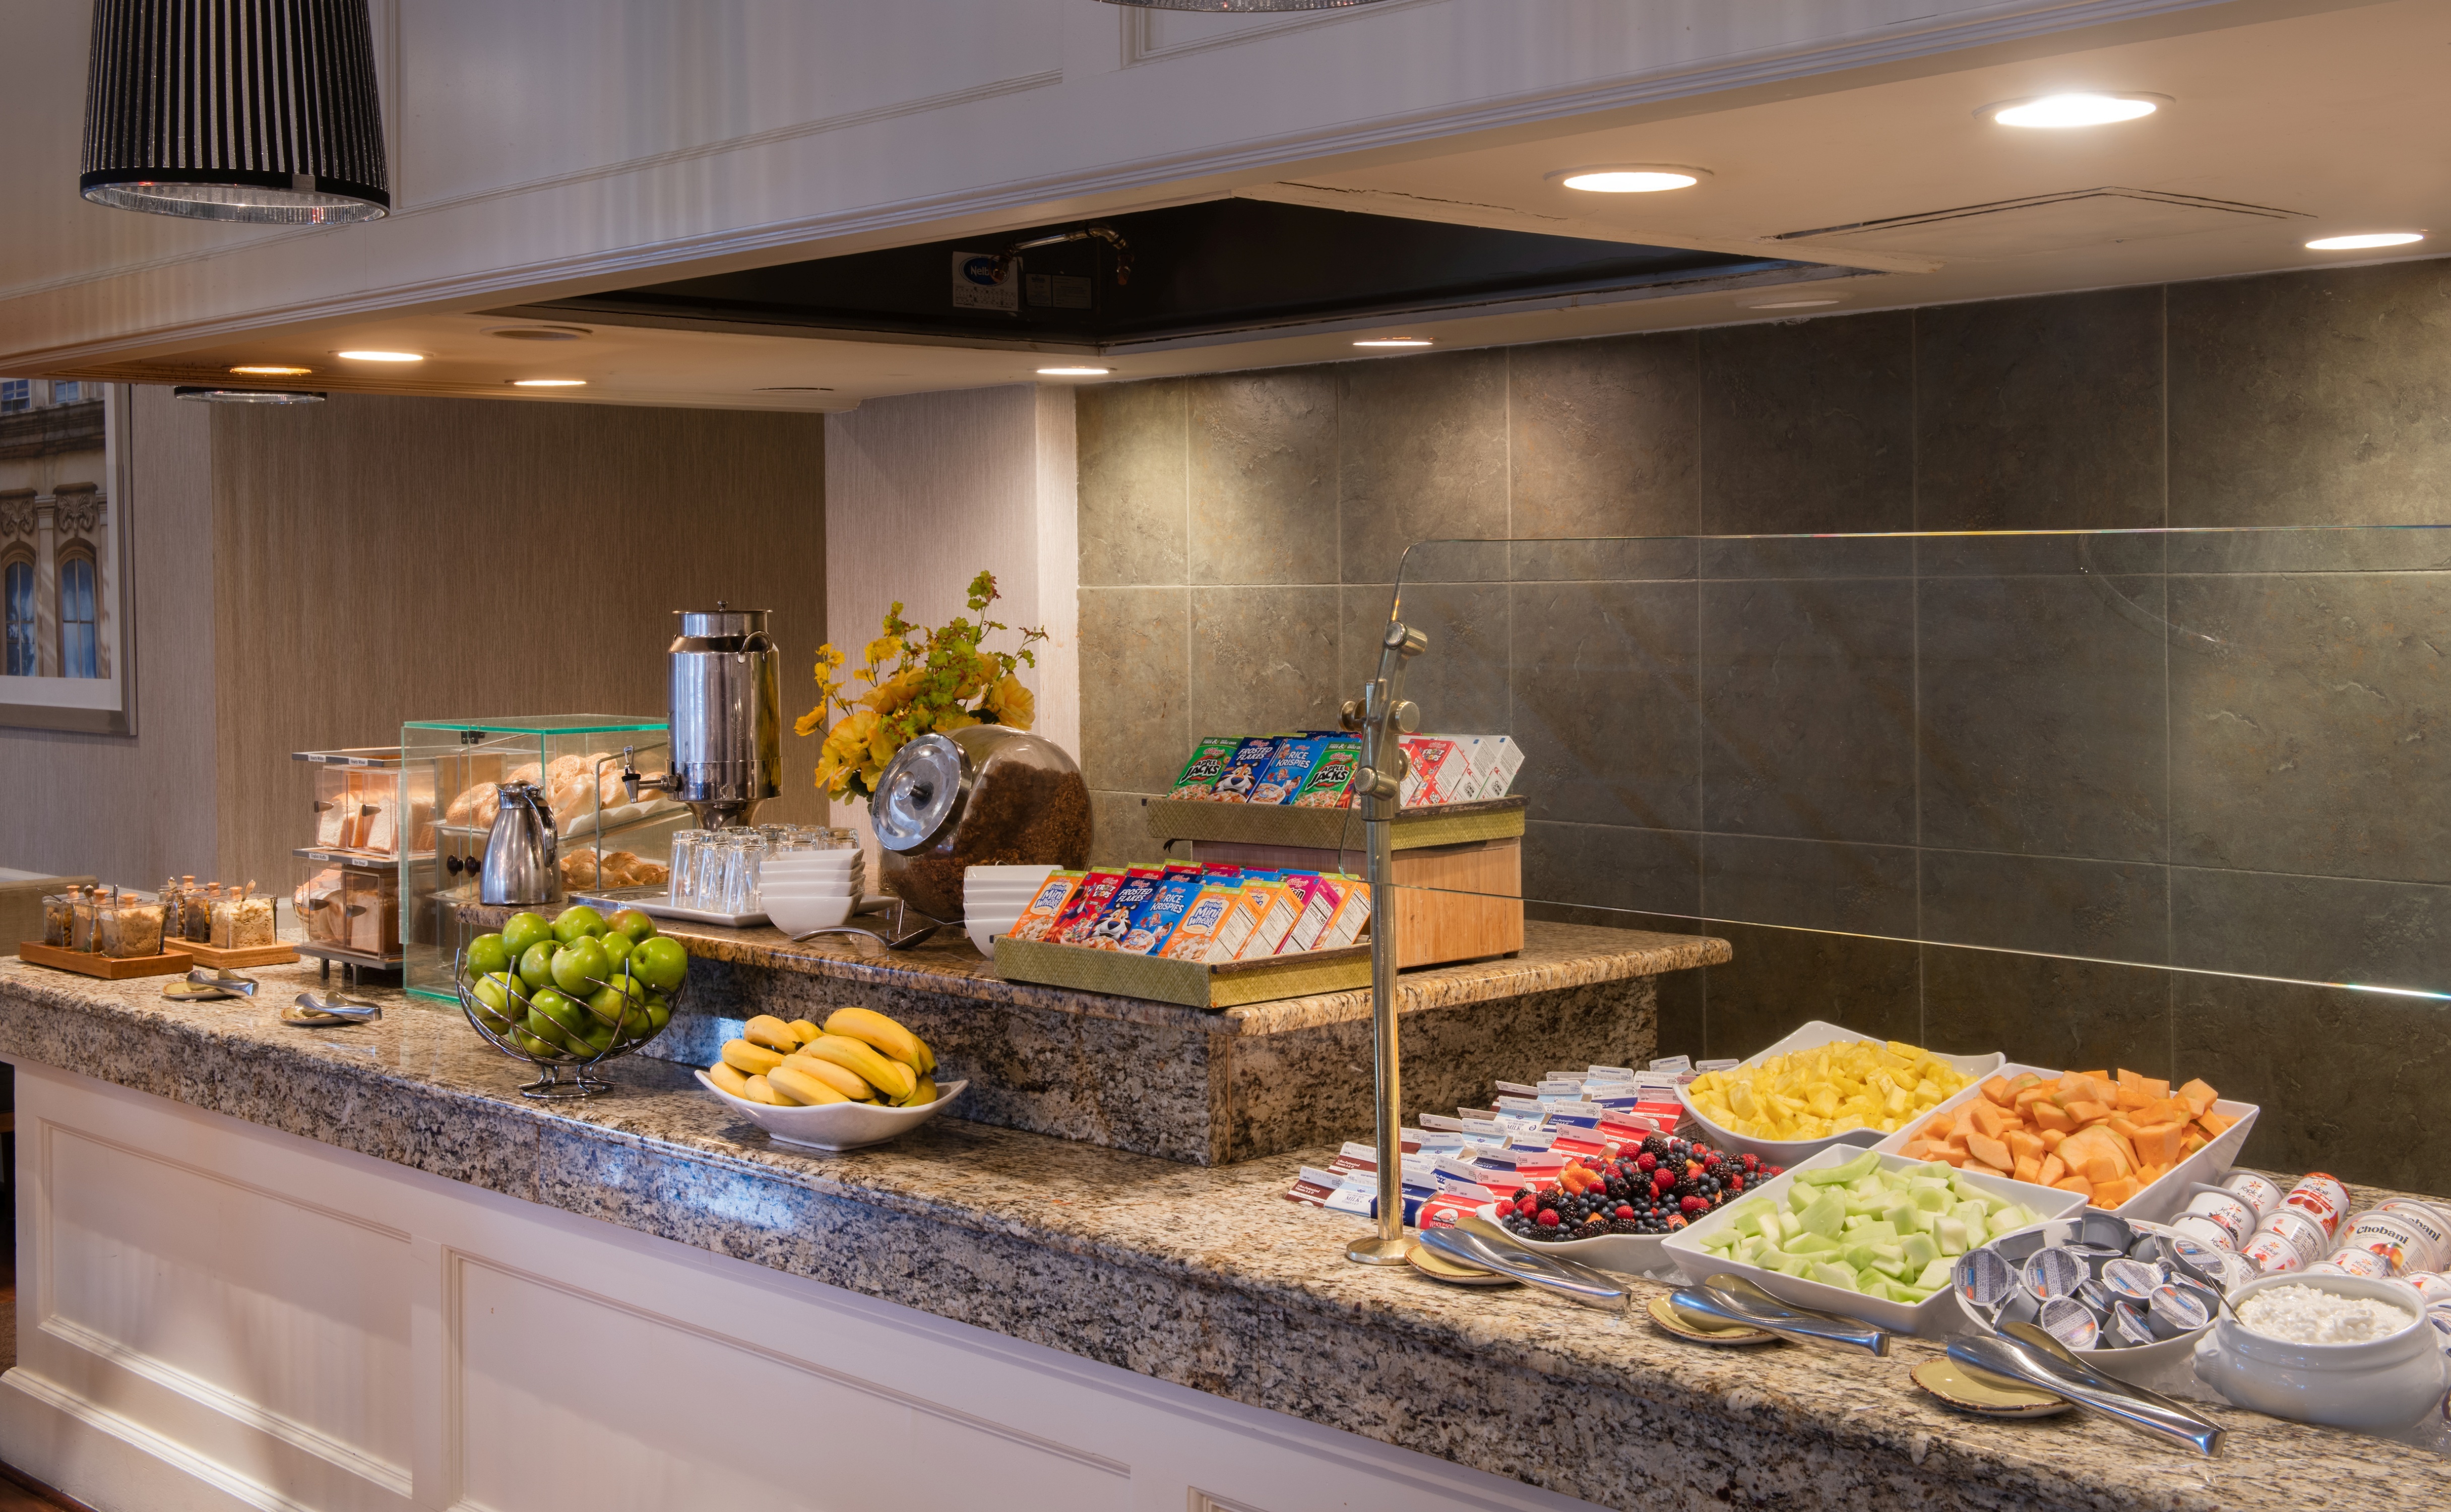 Brandywine offers a bountiful breakfast buffet in a warm and comfortable setting.